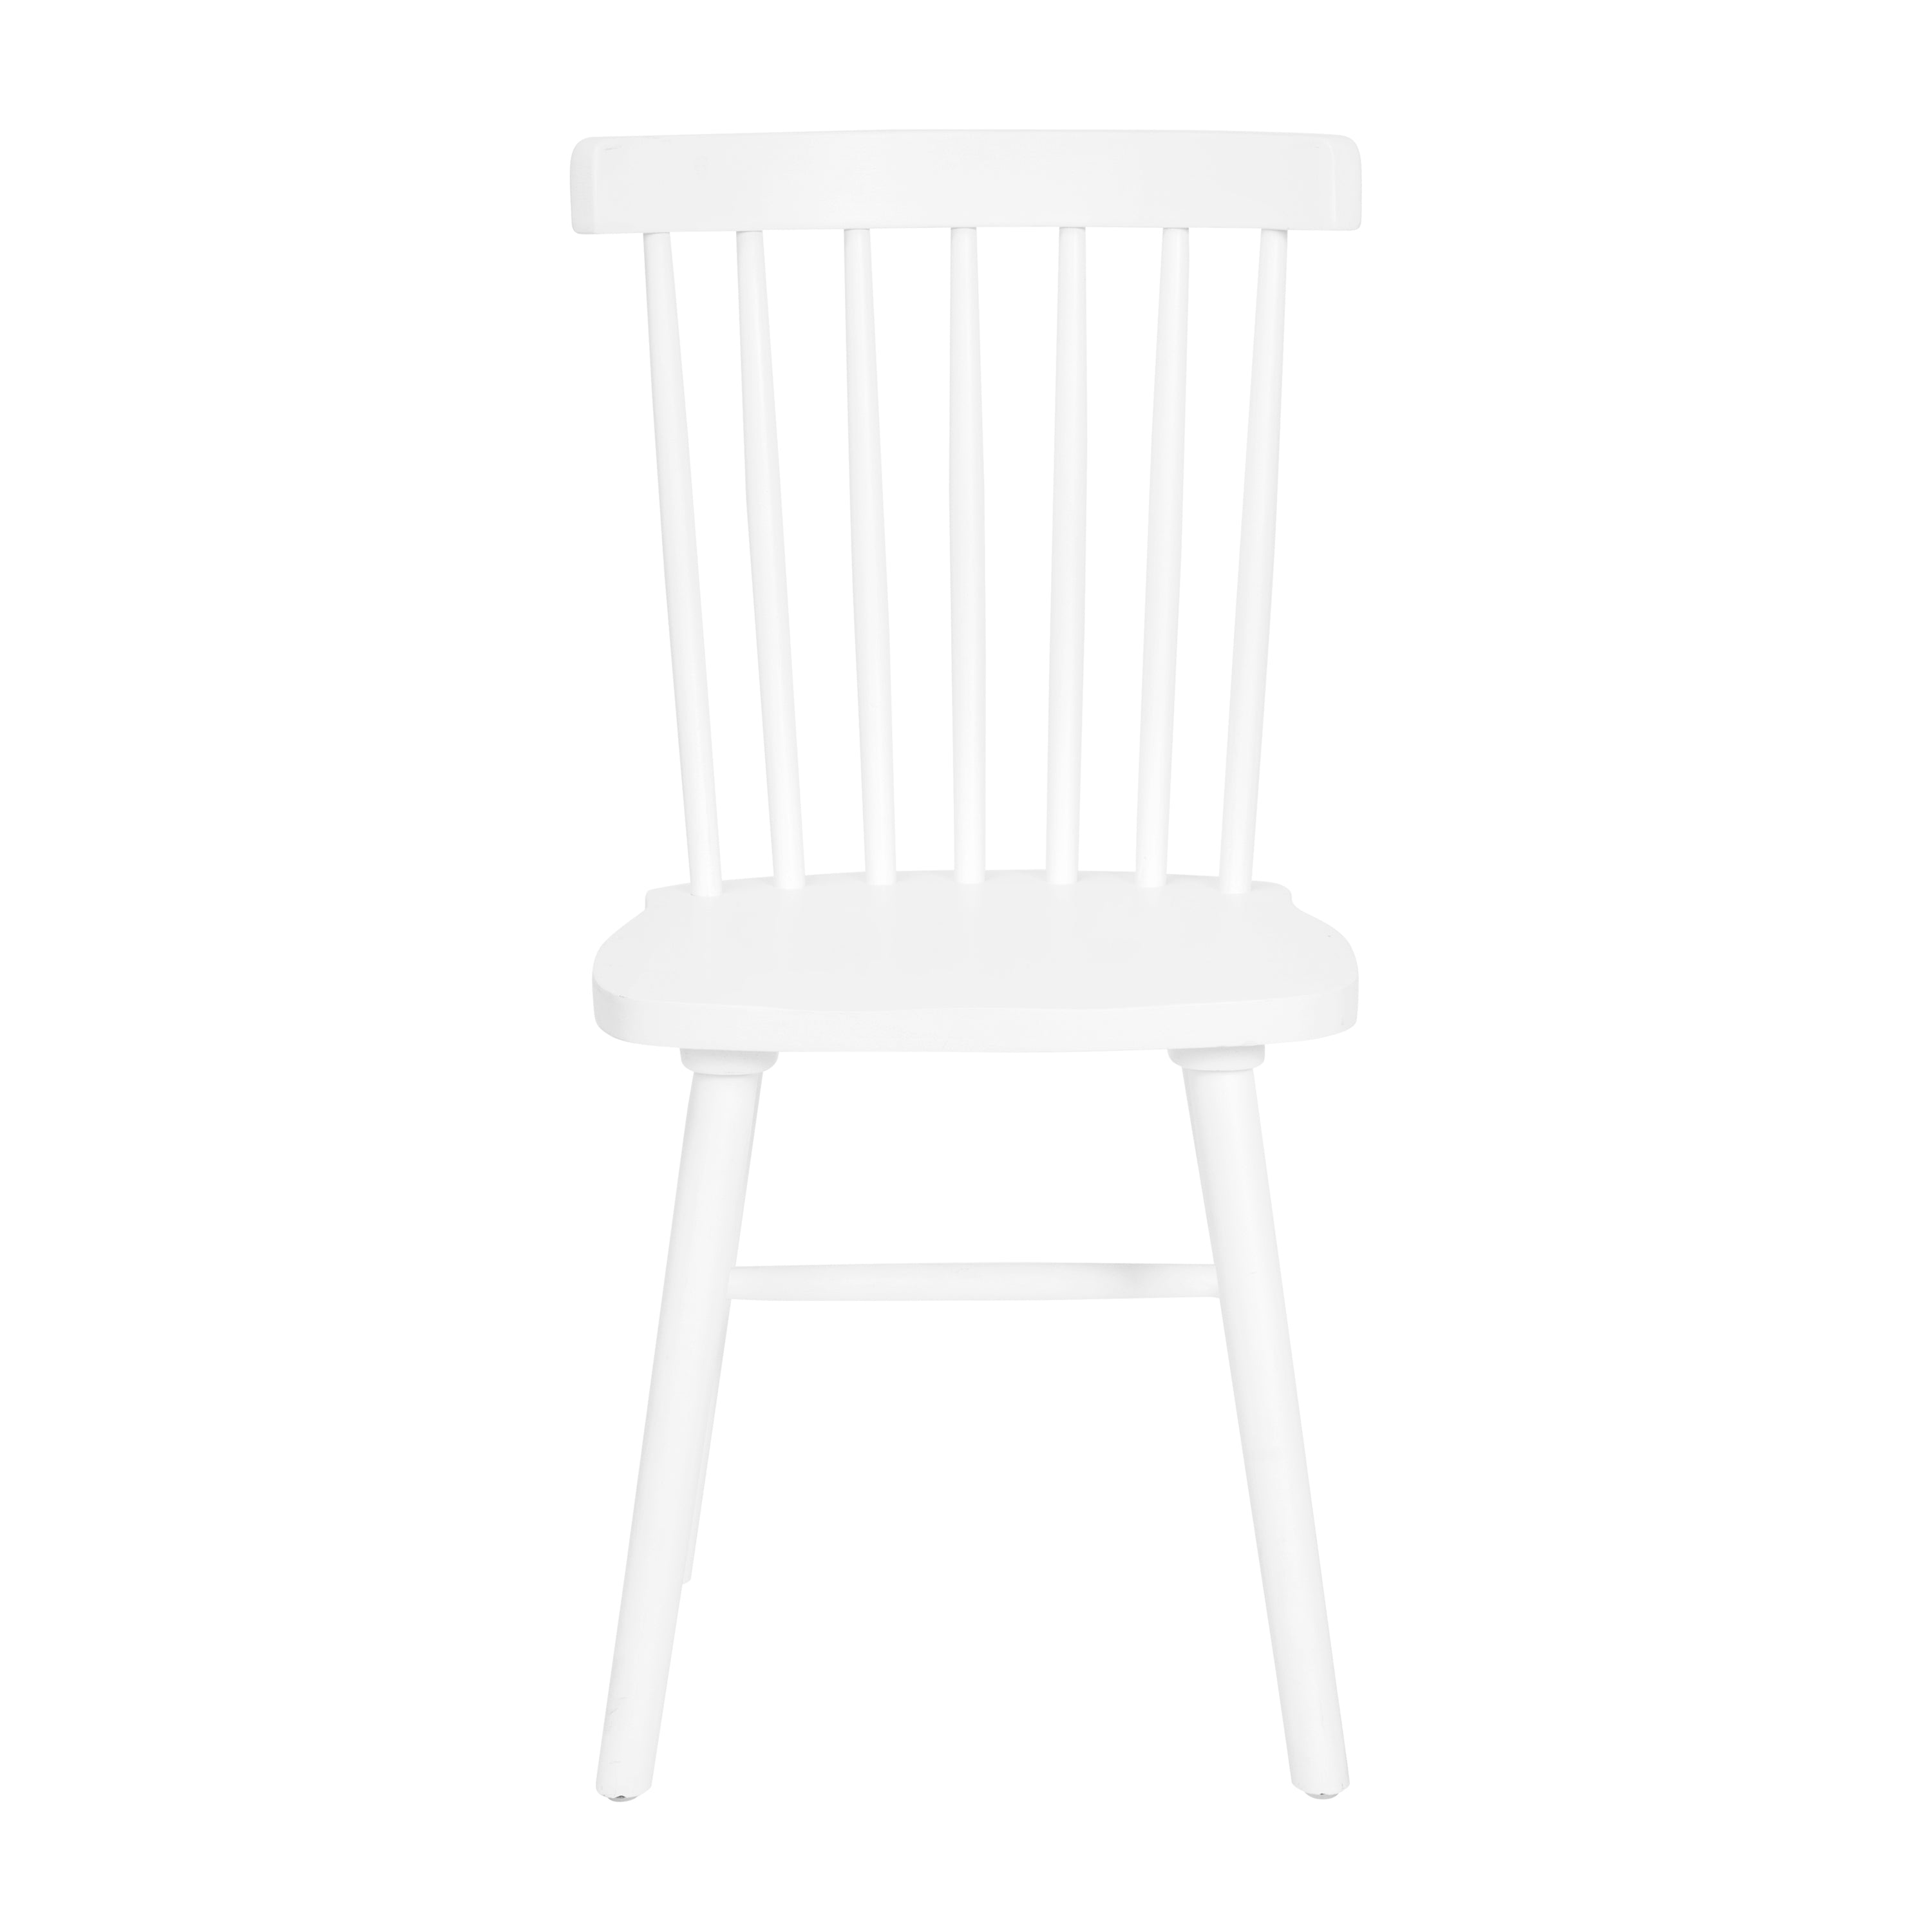 Ingrid Set of 2 Commercial Grade Windsor Dining Chairs, Solid Wood Armless Spindle Back Restaurant Dining Chairs-Restaurant Chair-Flash Furniture-Wall2Wall Furnishings